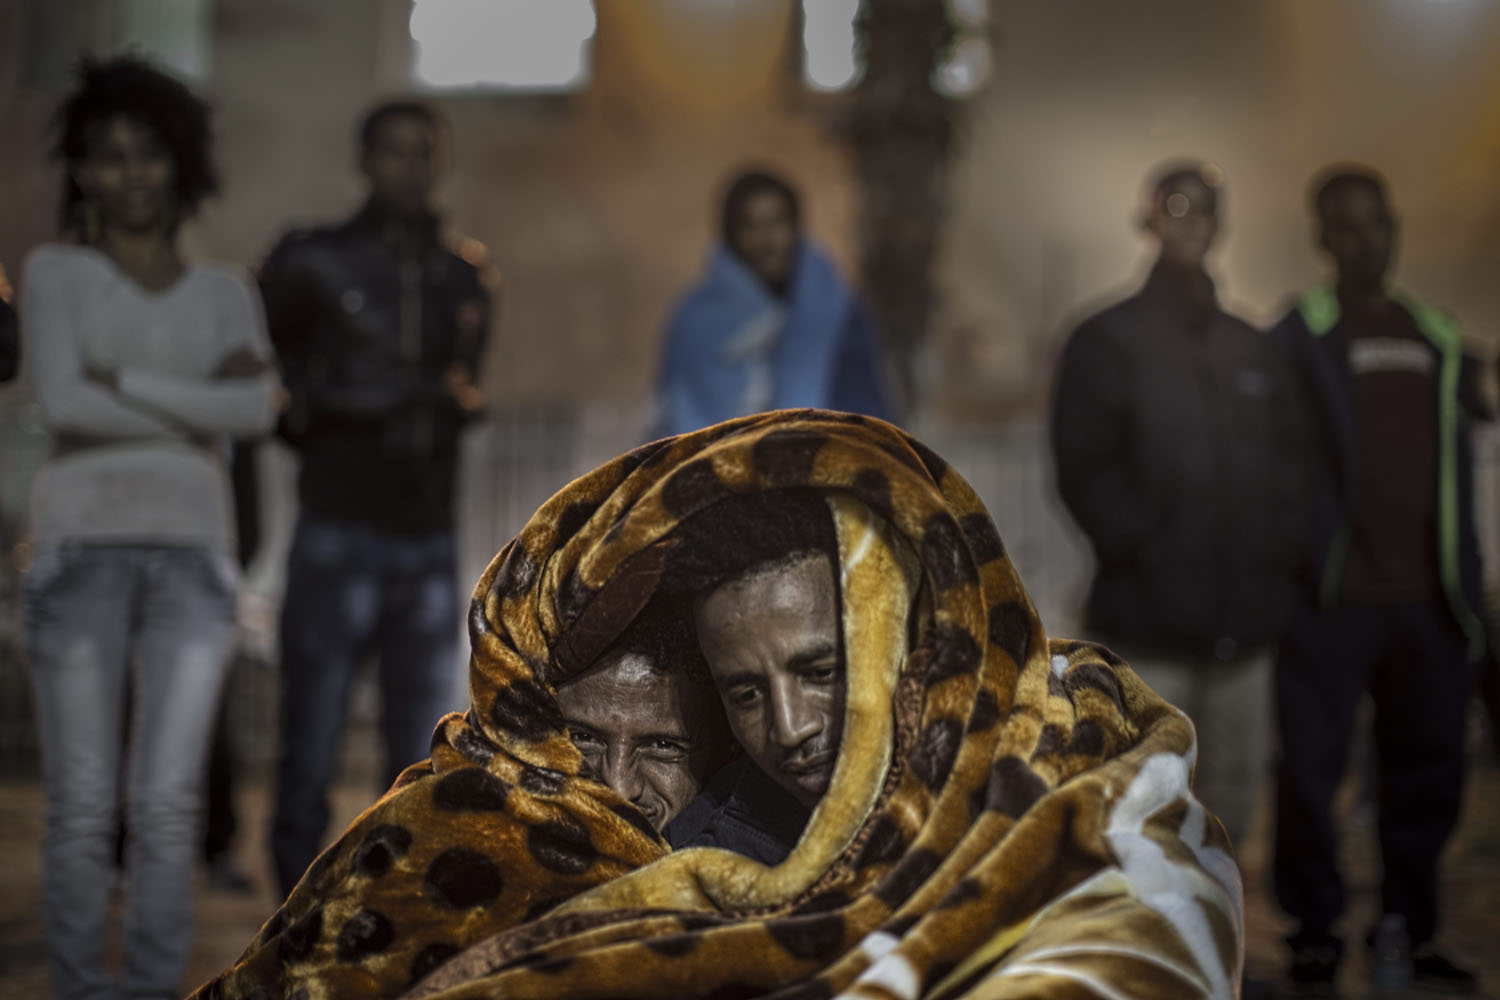 Feb. 3, 2014. African asylum seekers share a blanket to keep warm while attending a protest in Levinski Park, southern Tel Aviv, Israel.